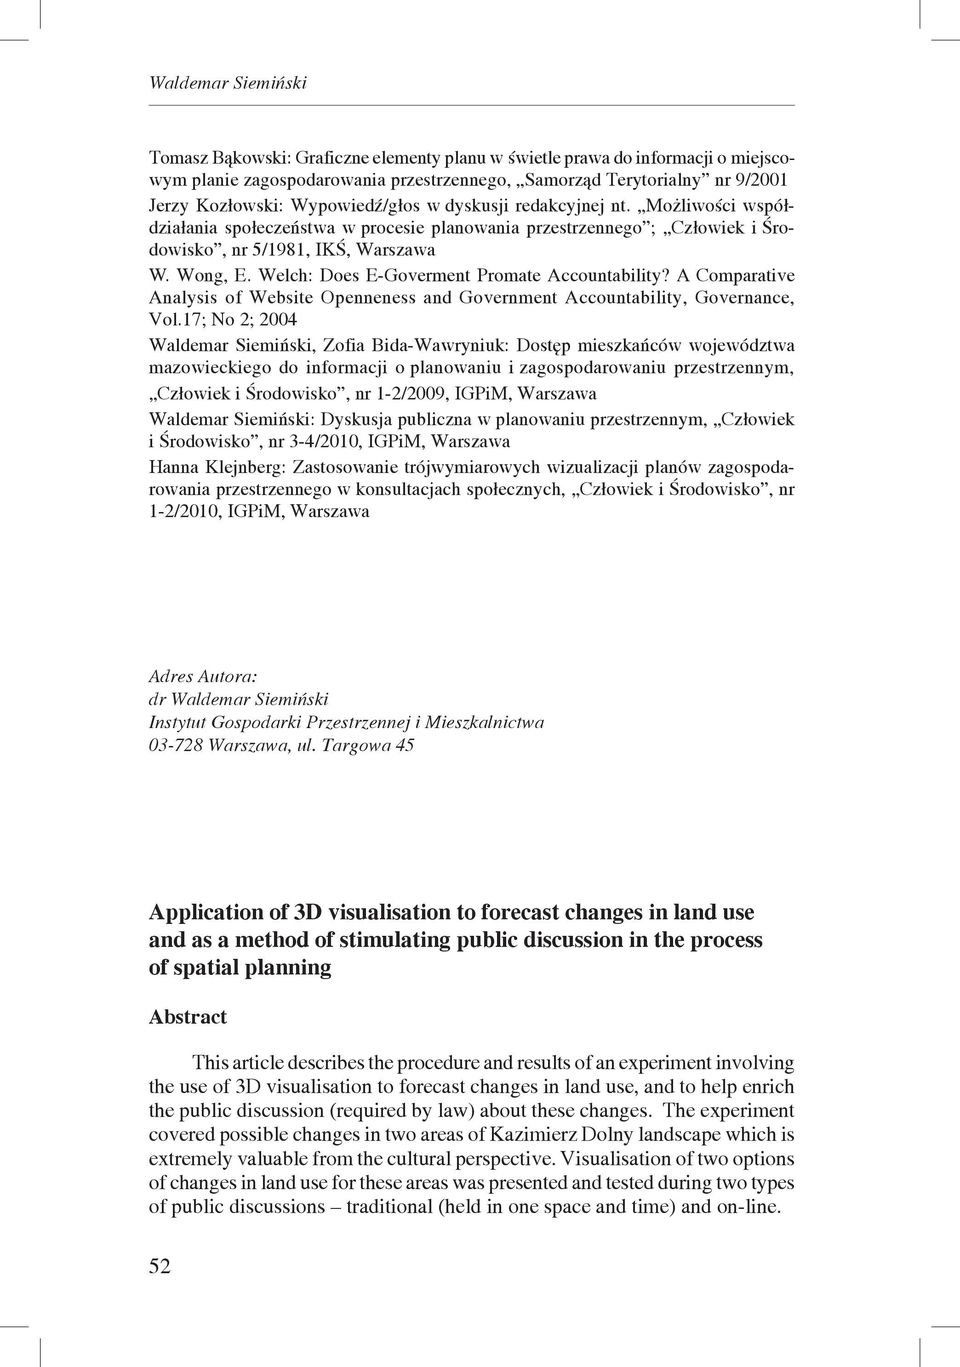 Welch: Does E-Goverment Promate Accountability? A Comparative Analysis of Website Openneness and Government Accountability, Governance, Vol.